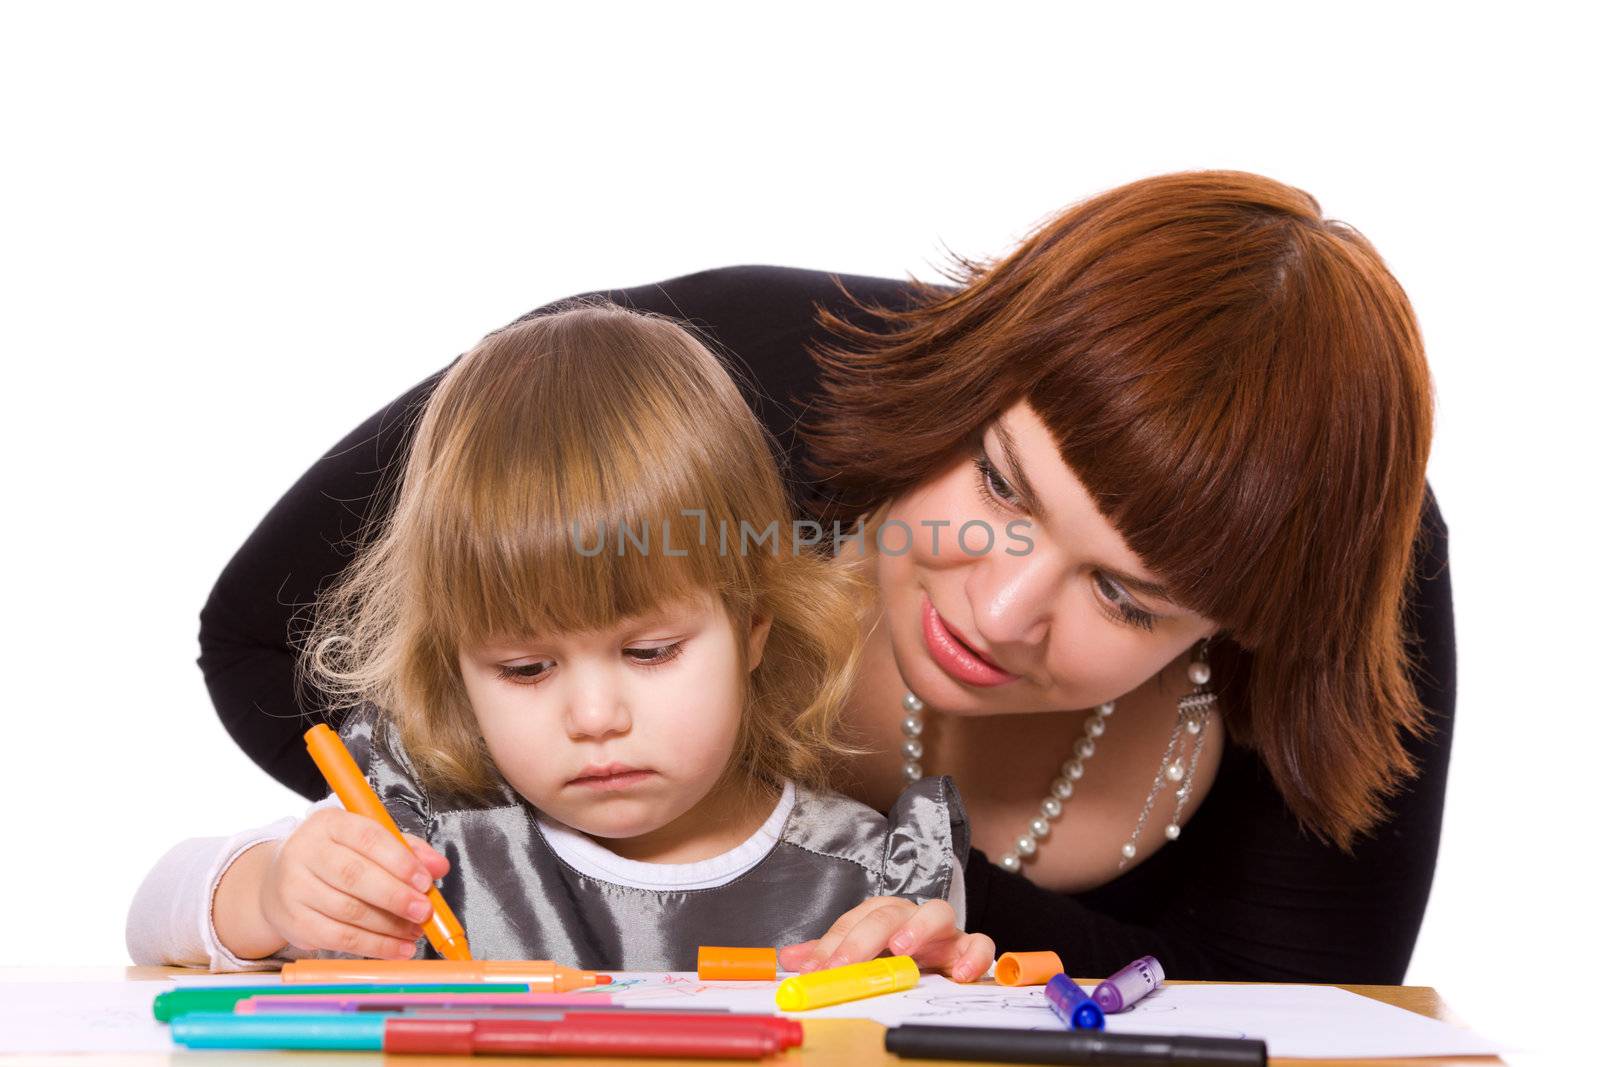 Mother helping daughter to draw isolated on white